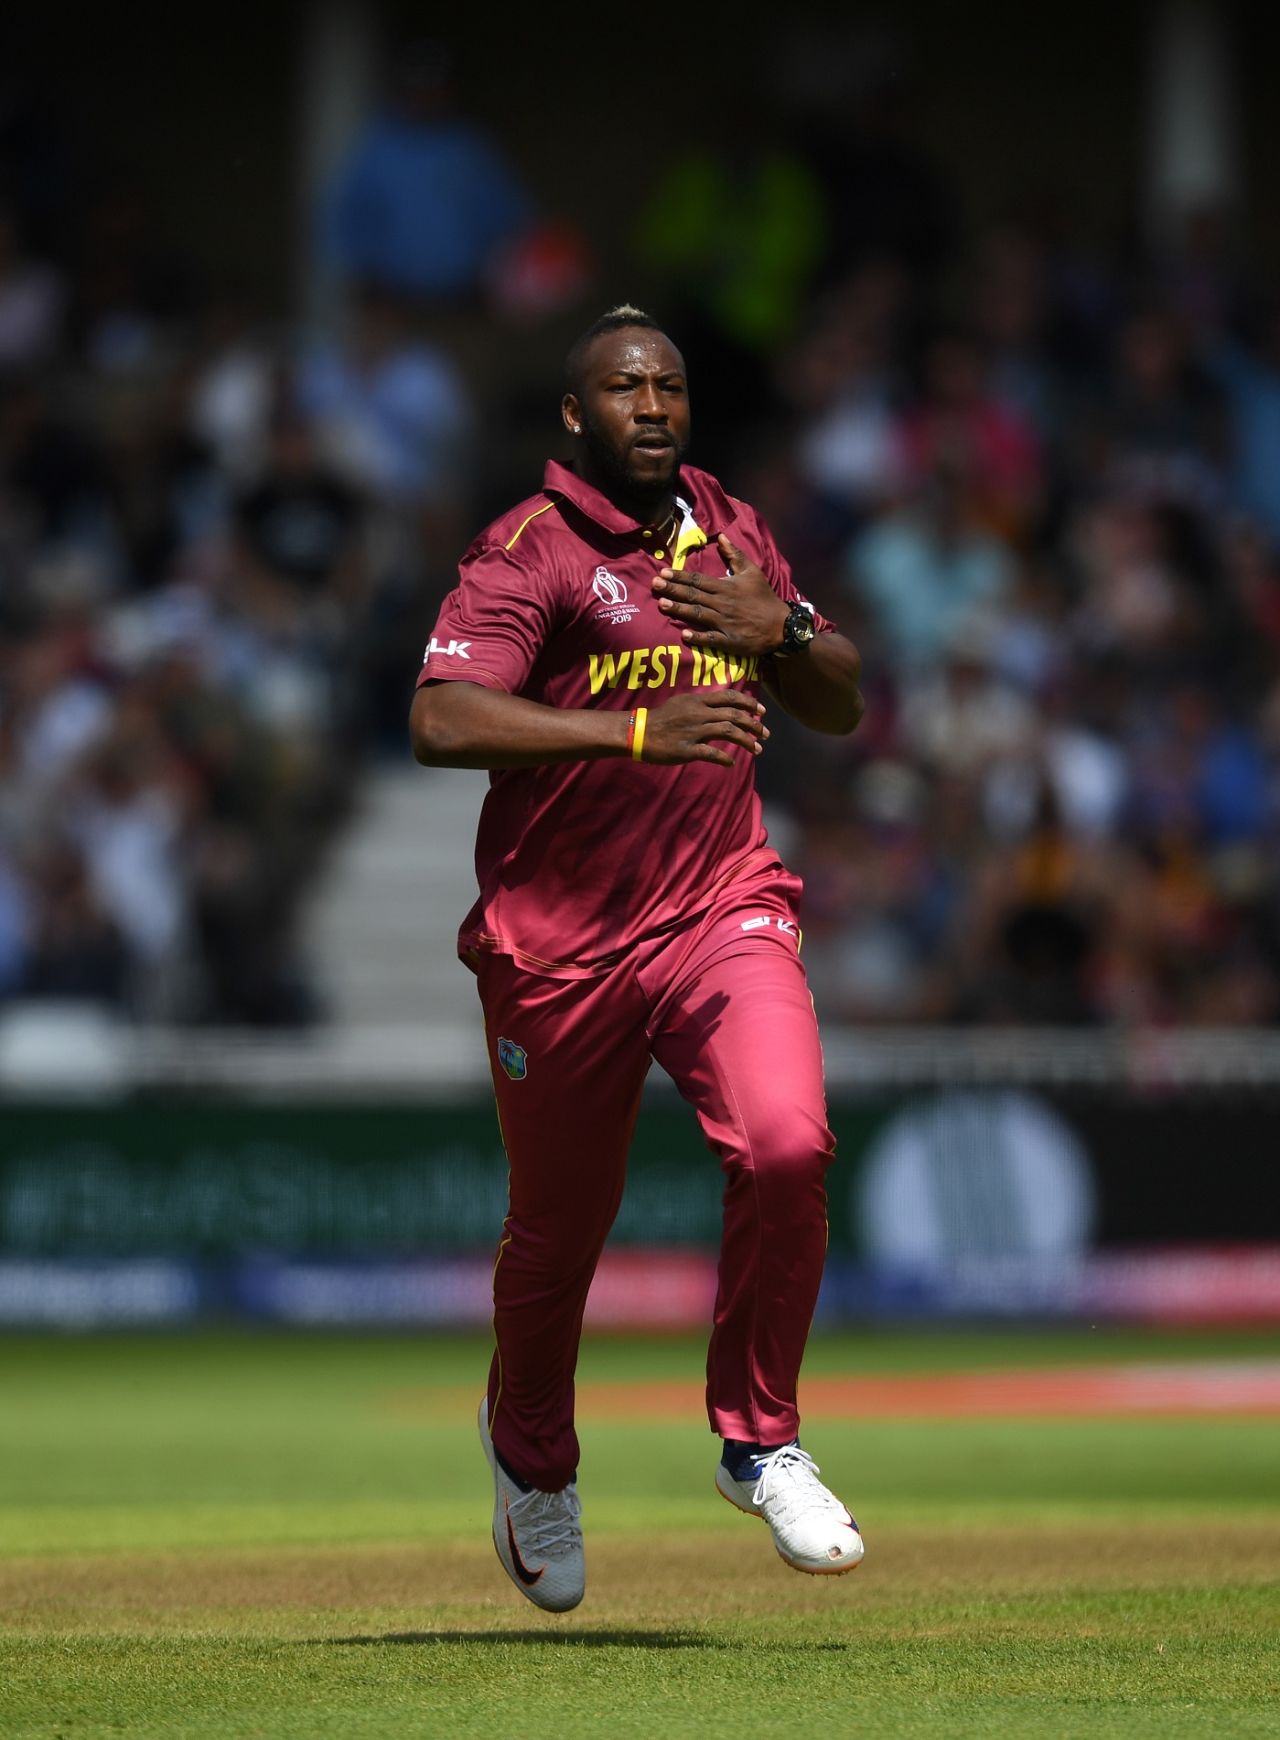 Andre Russell has always had the heart - but does he have the knees? Australia v West Indies, World Cup 2019, Trent Bridge, June 6, 2019